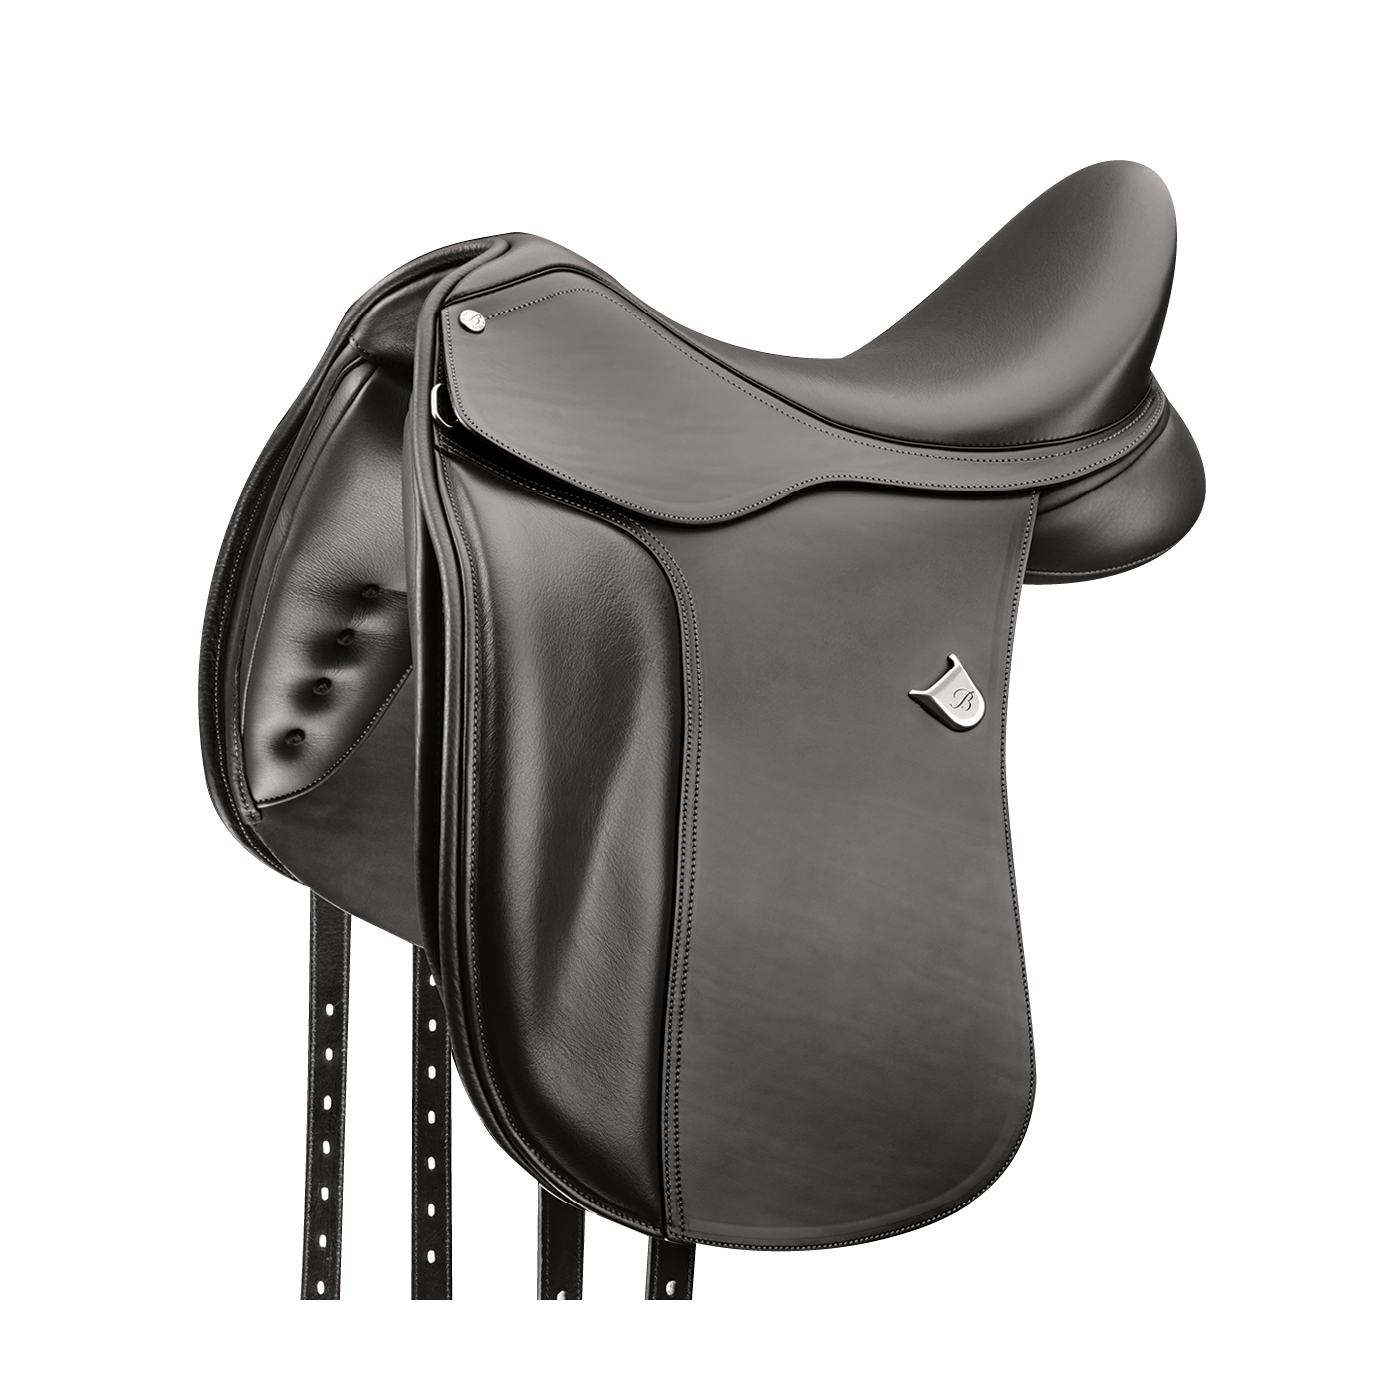 Bates Dressage in Classic Black Heritage Leather (DISPLAY MODEL)